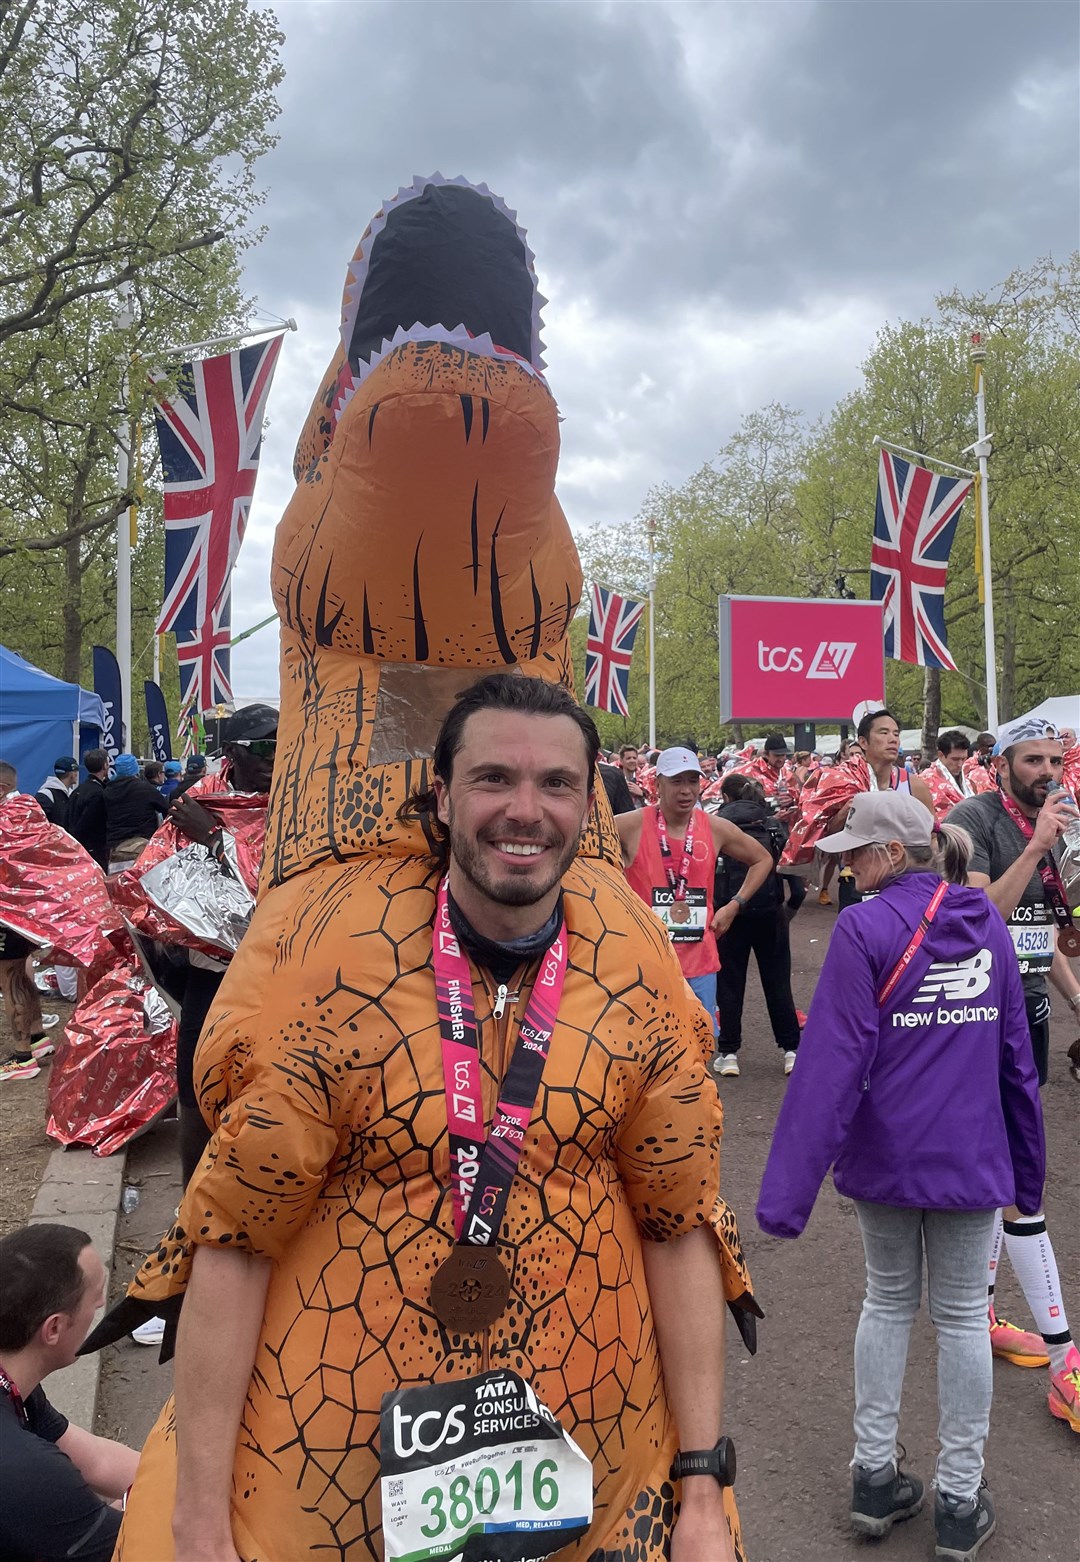 Lee Baynton after finishing the TCS London Marathon dressed in an inflatable costume (Samuel Montgomery/PA)